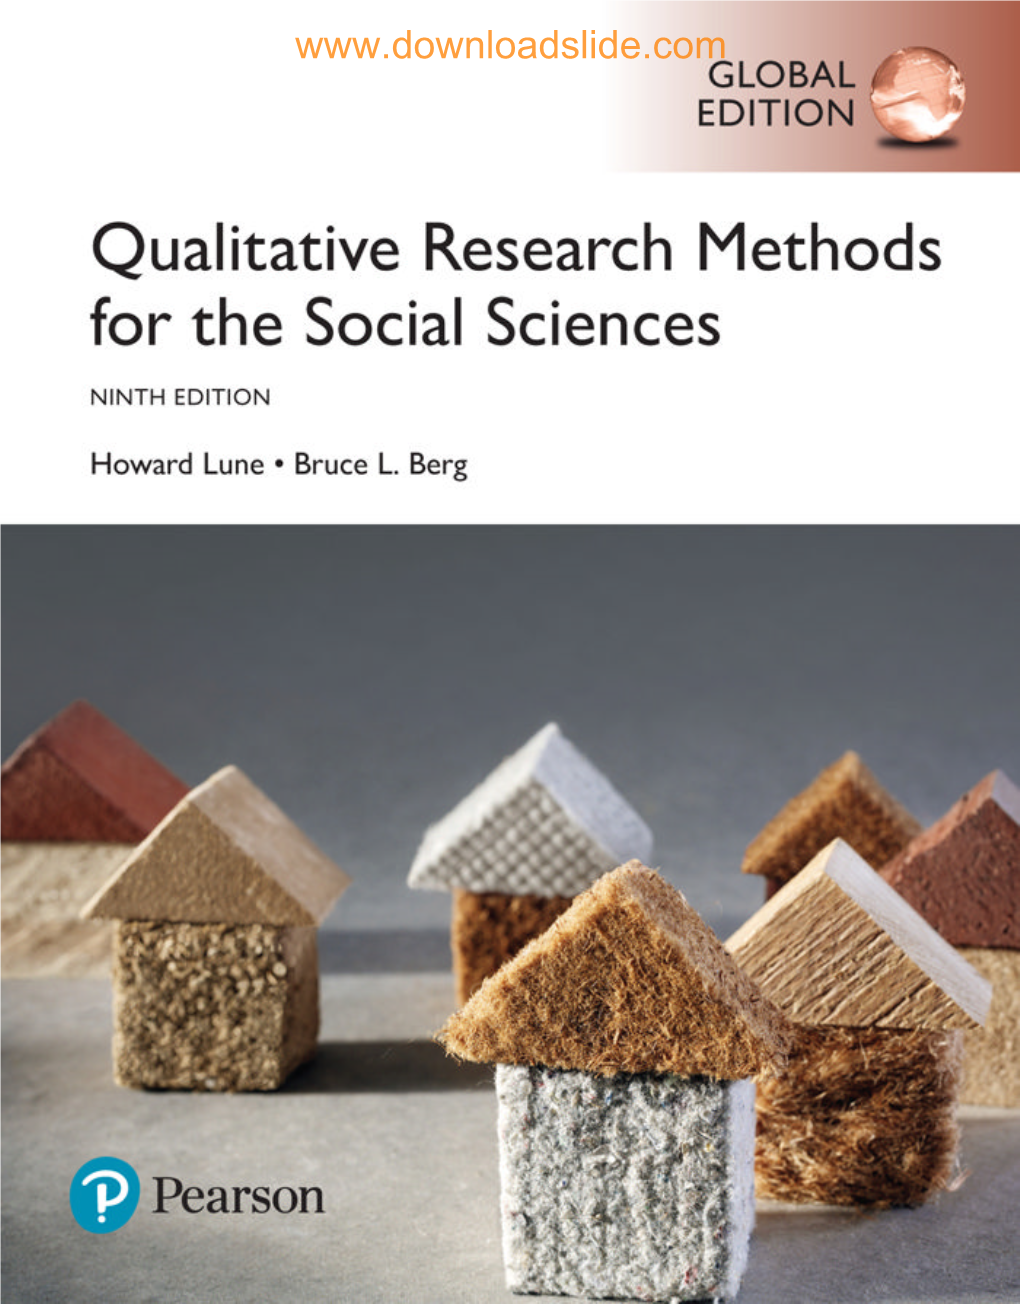 Qualitative Research Methods for the Social Sciences, Global